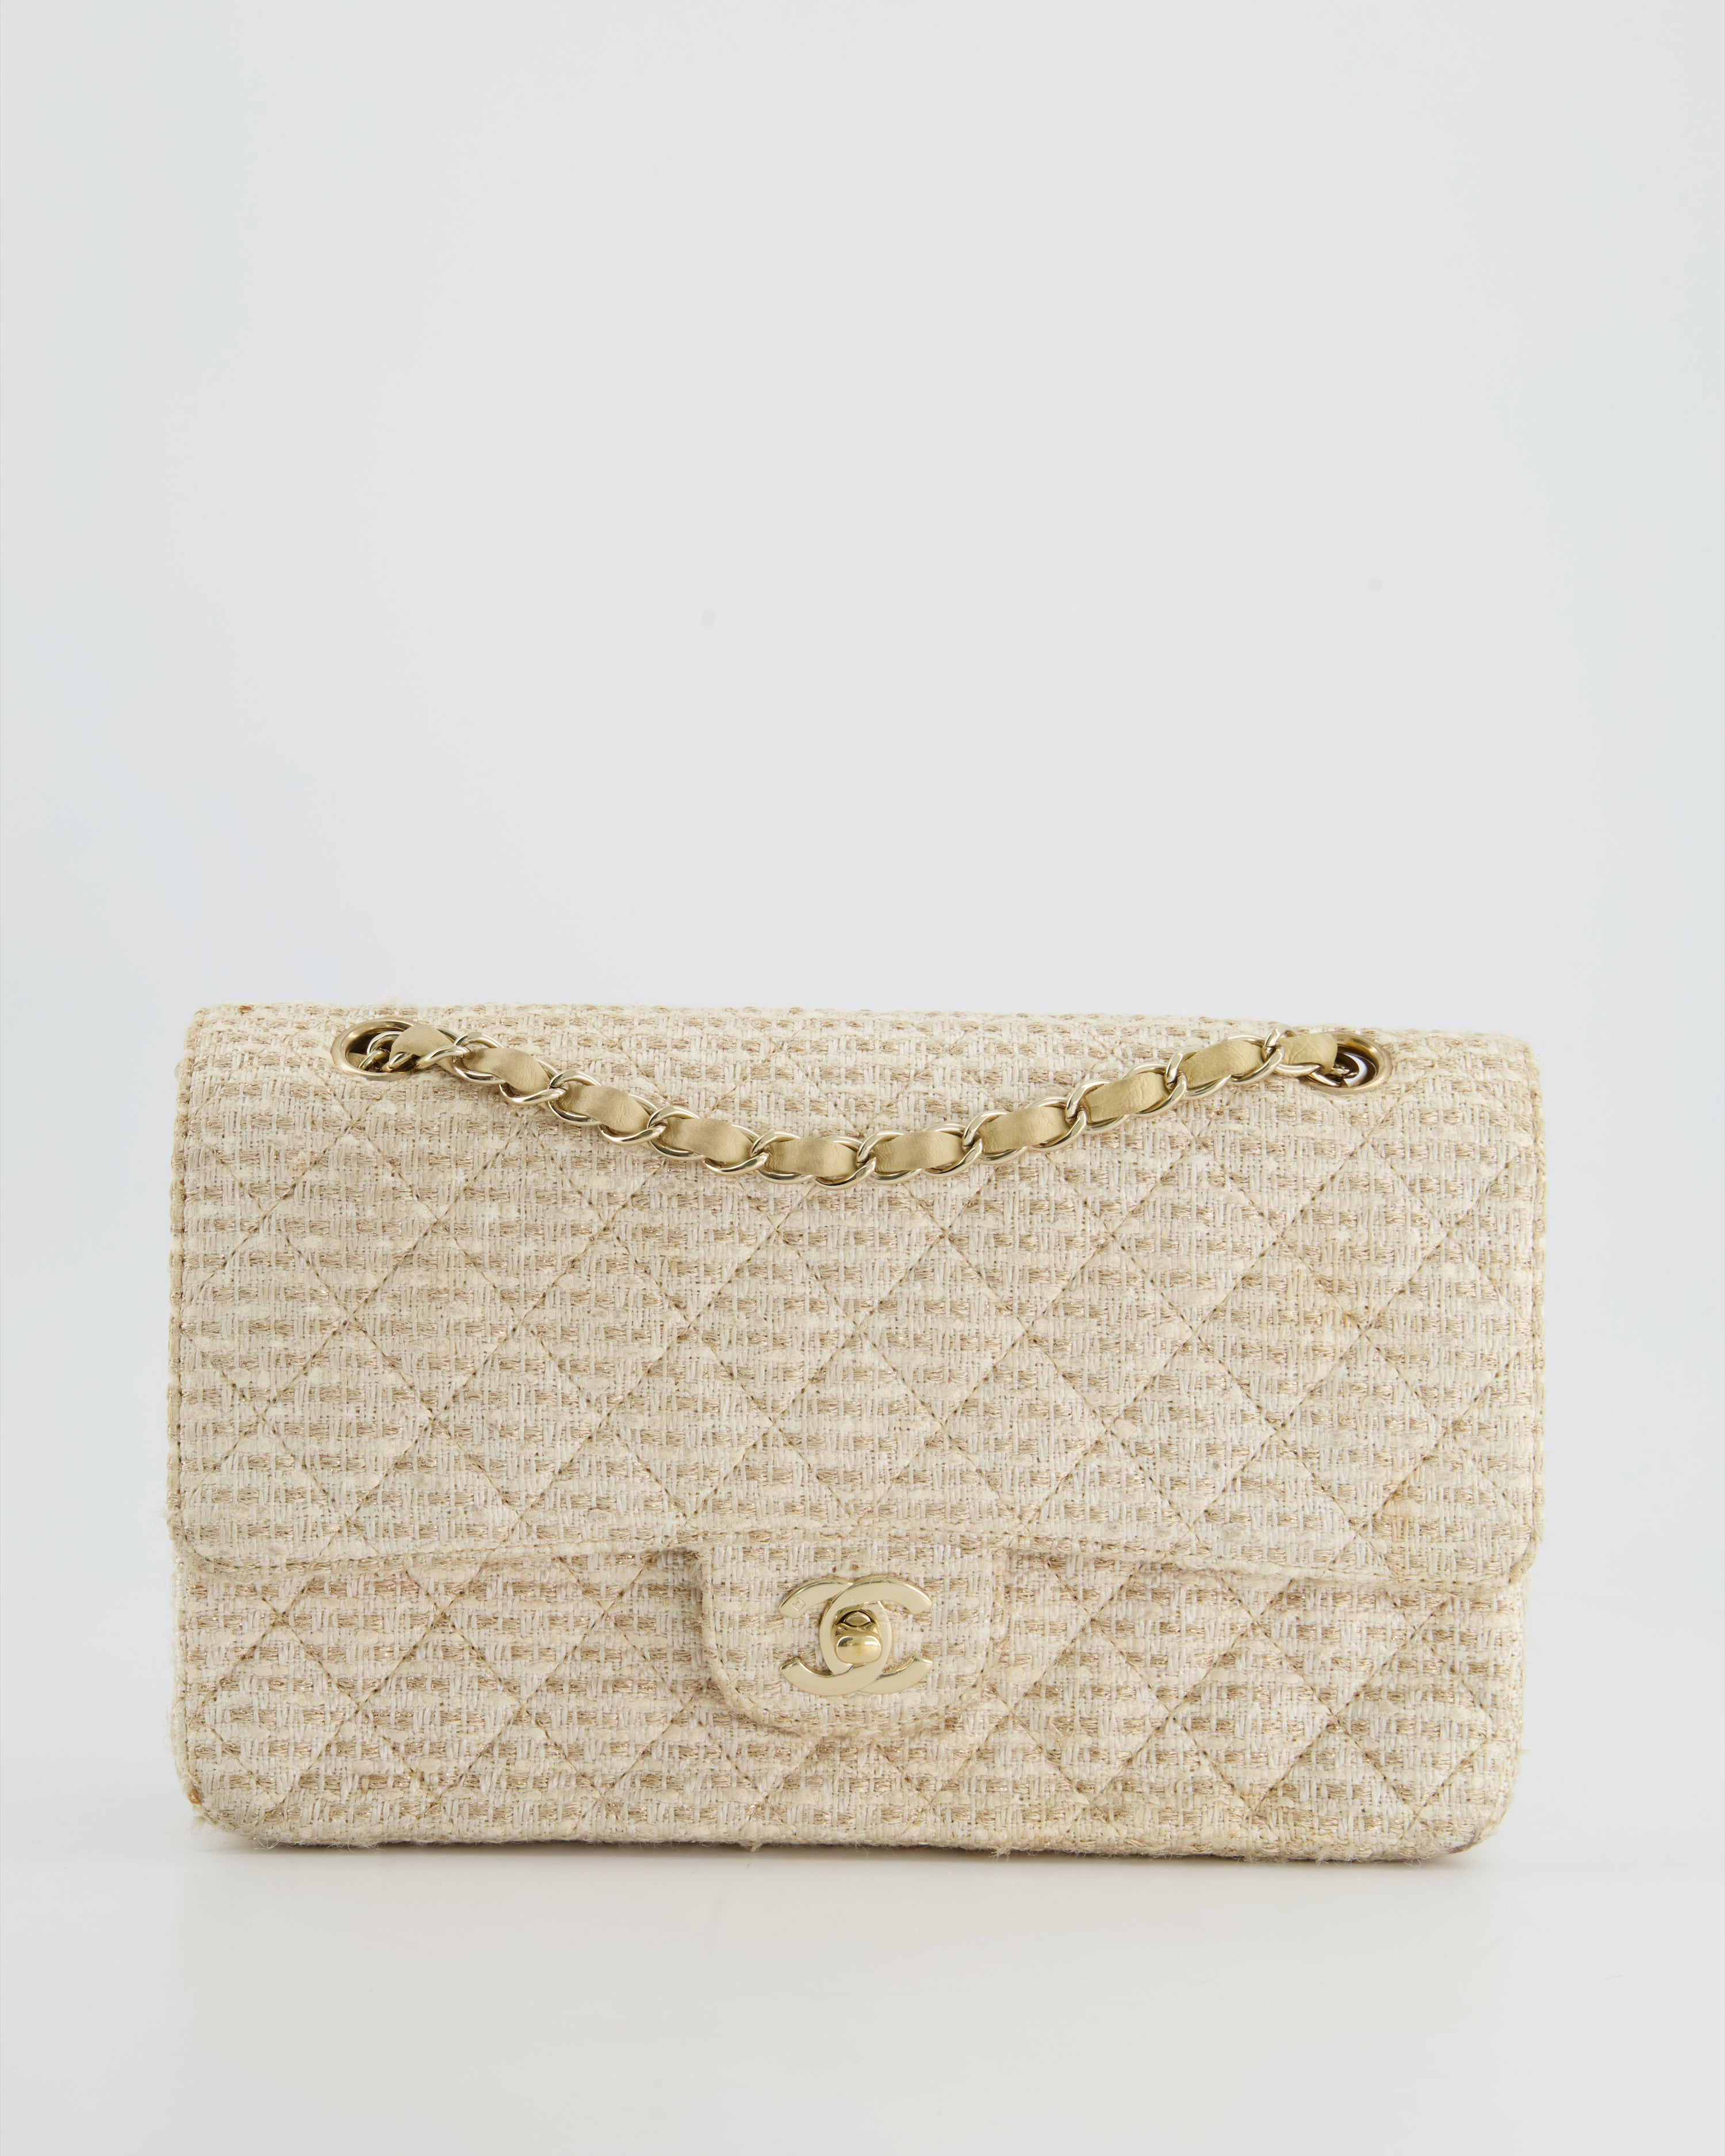 Chanel Classic Mini Rectangular 22K Pink Tweed with light gold